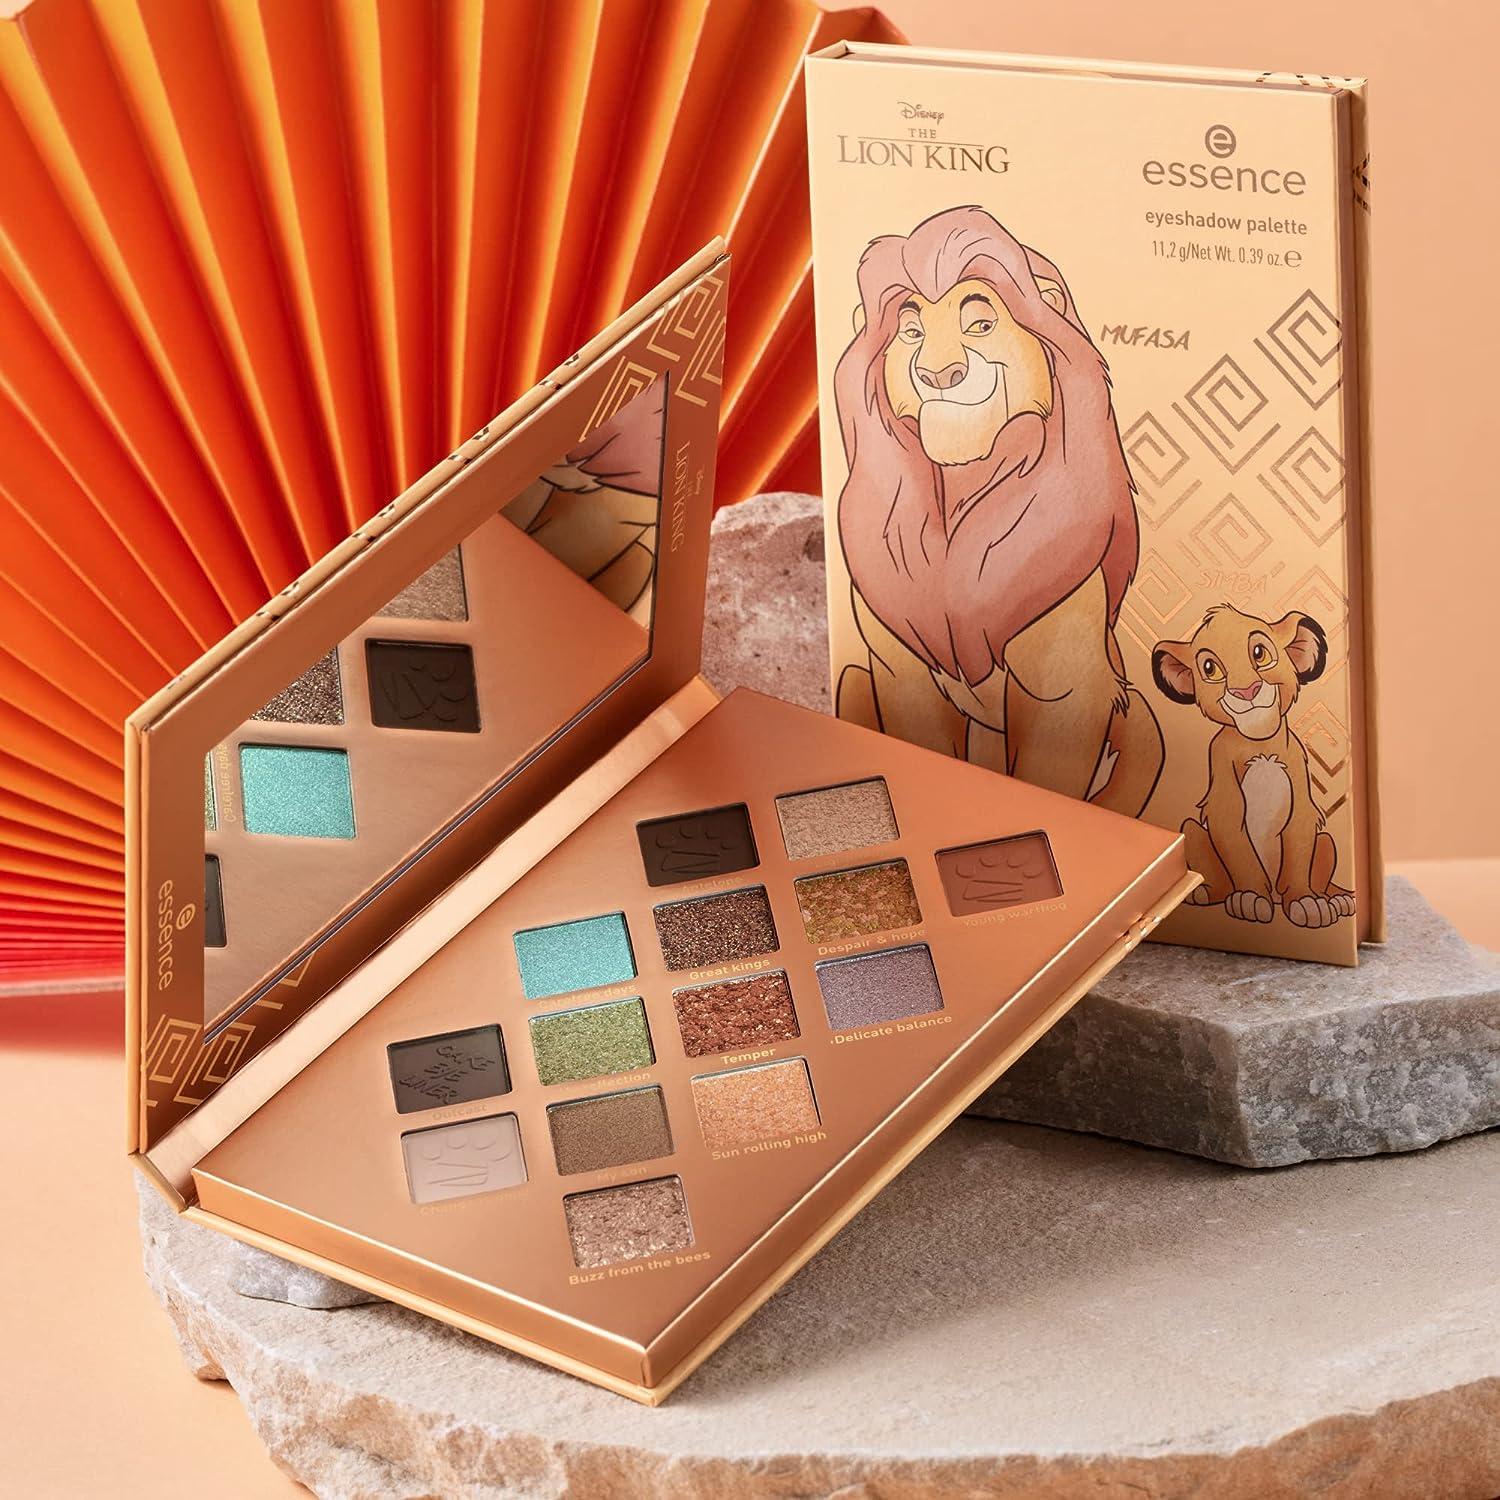 Lion Easy Disney Free | Vegan Edition | Collection 14 & & King Limited Palette Oil Metallic Cruelty Paraben Matte Eyeshadow to The | | Shadows essence Highly | | Pigmented Blend